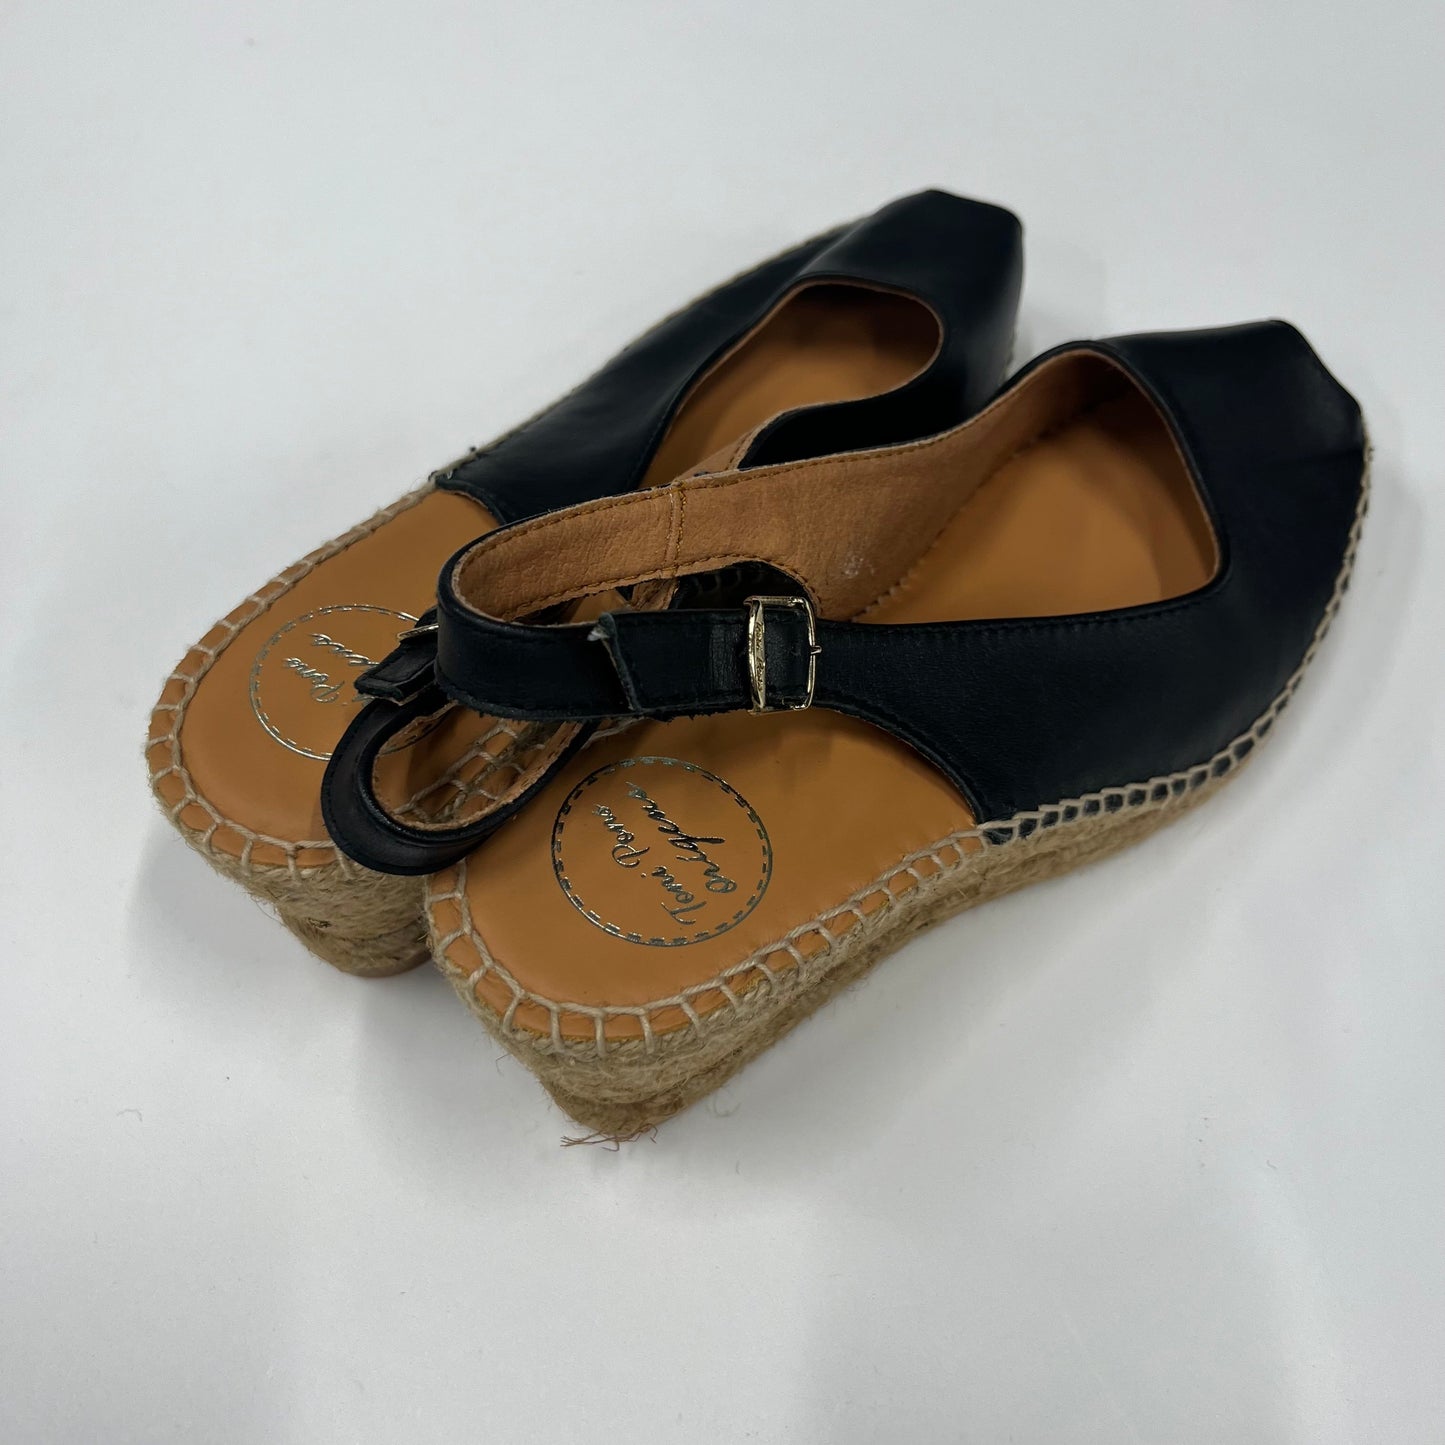 Shoes Heels Espadrille Wedge By Toni Pons  Size: 7.5